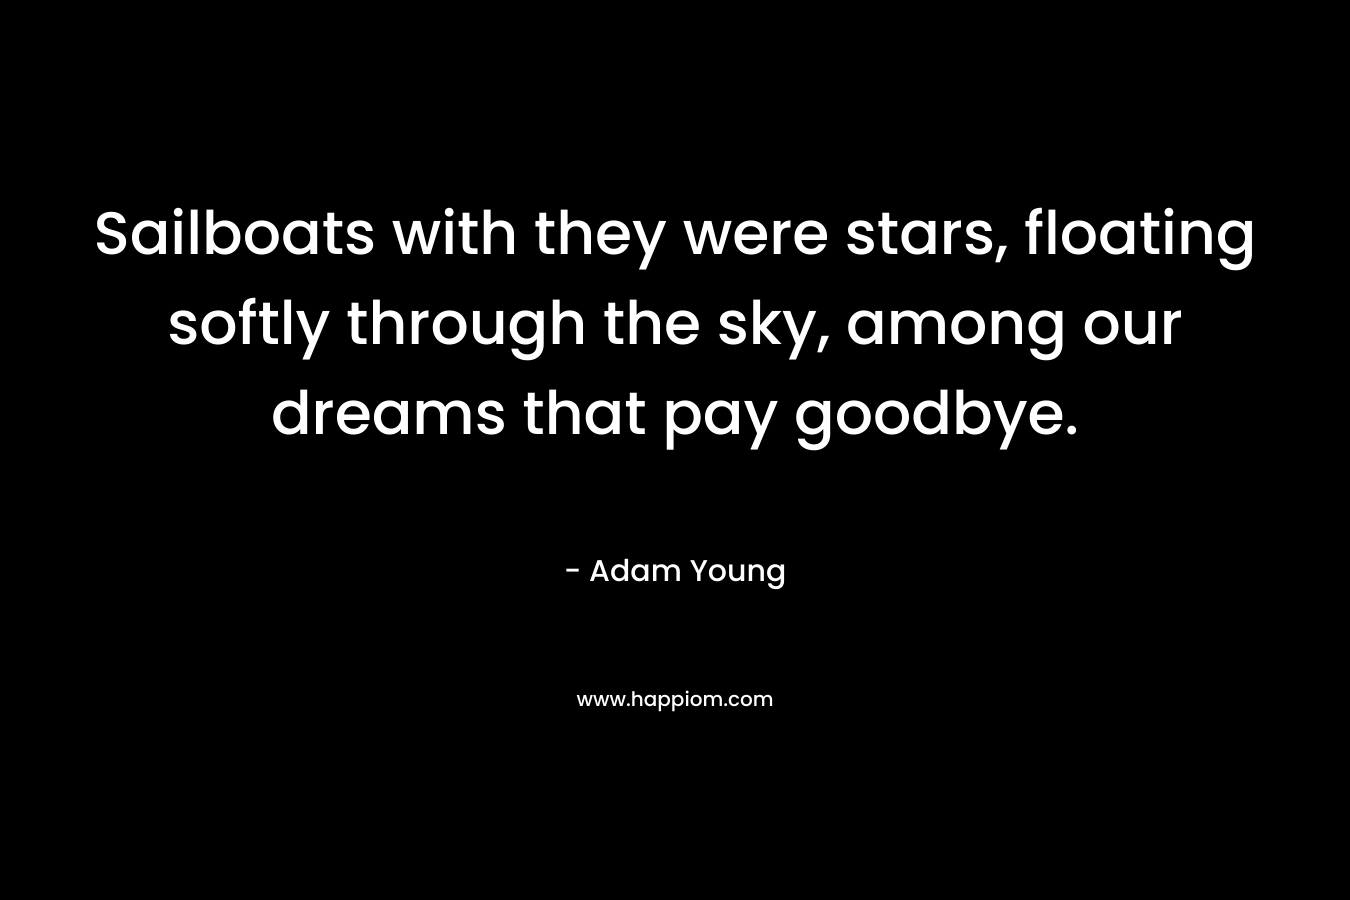 Sailboats with they were stars, floating softly through the sky, among our dreams that pay goodbye. – Adam Young